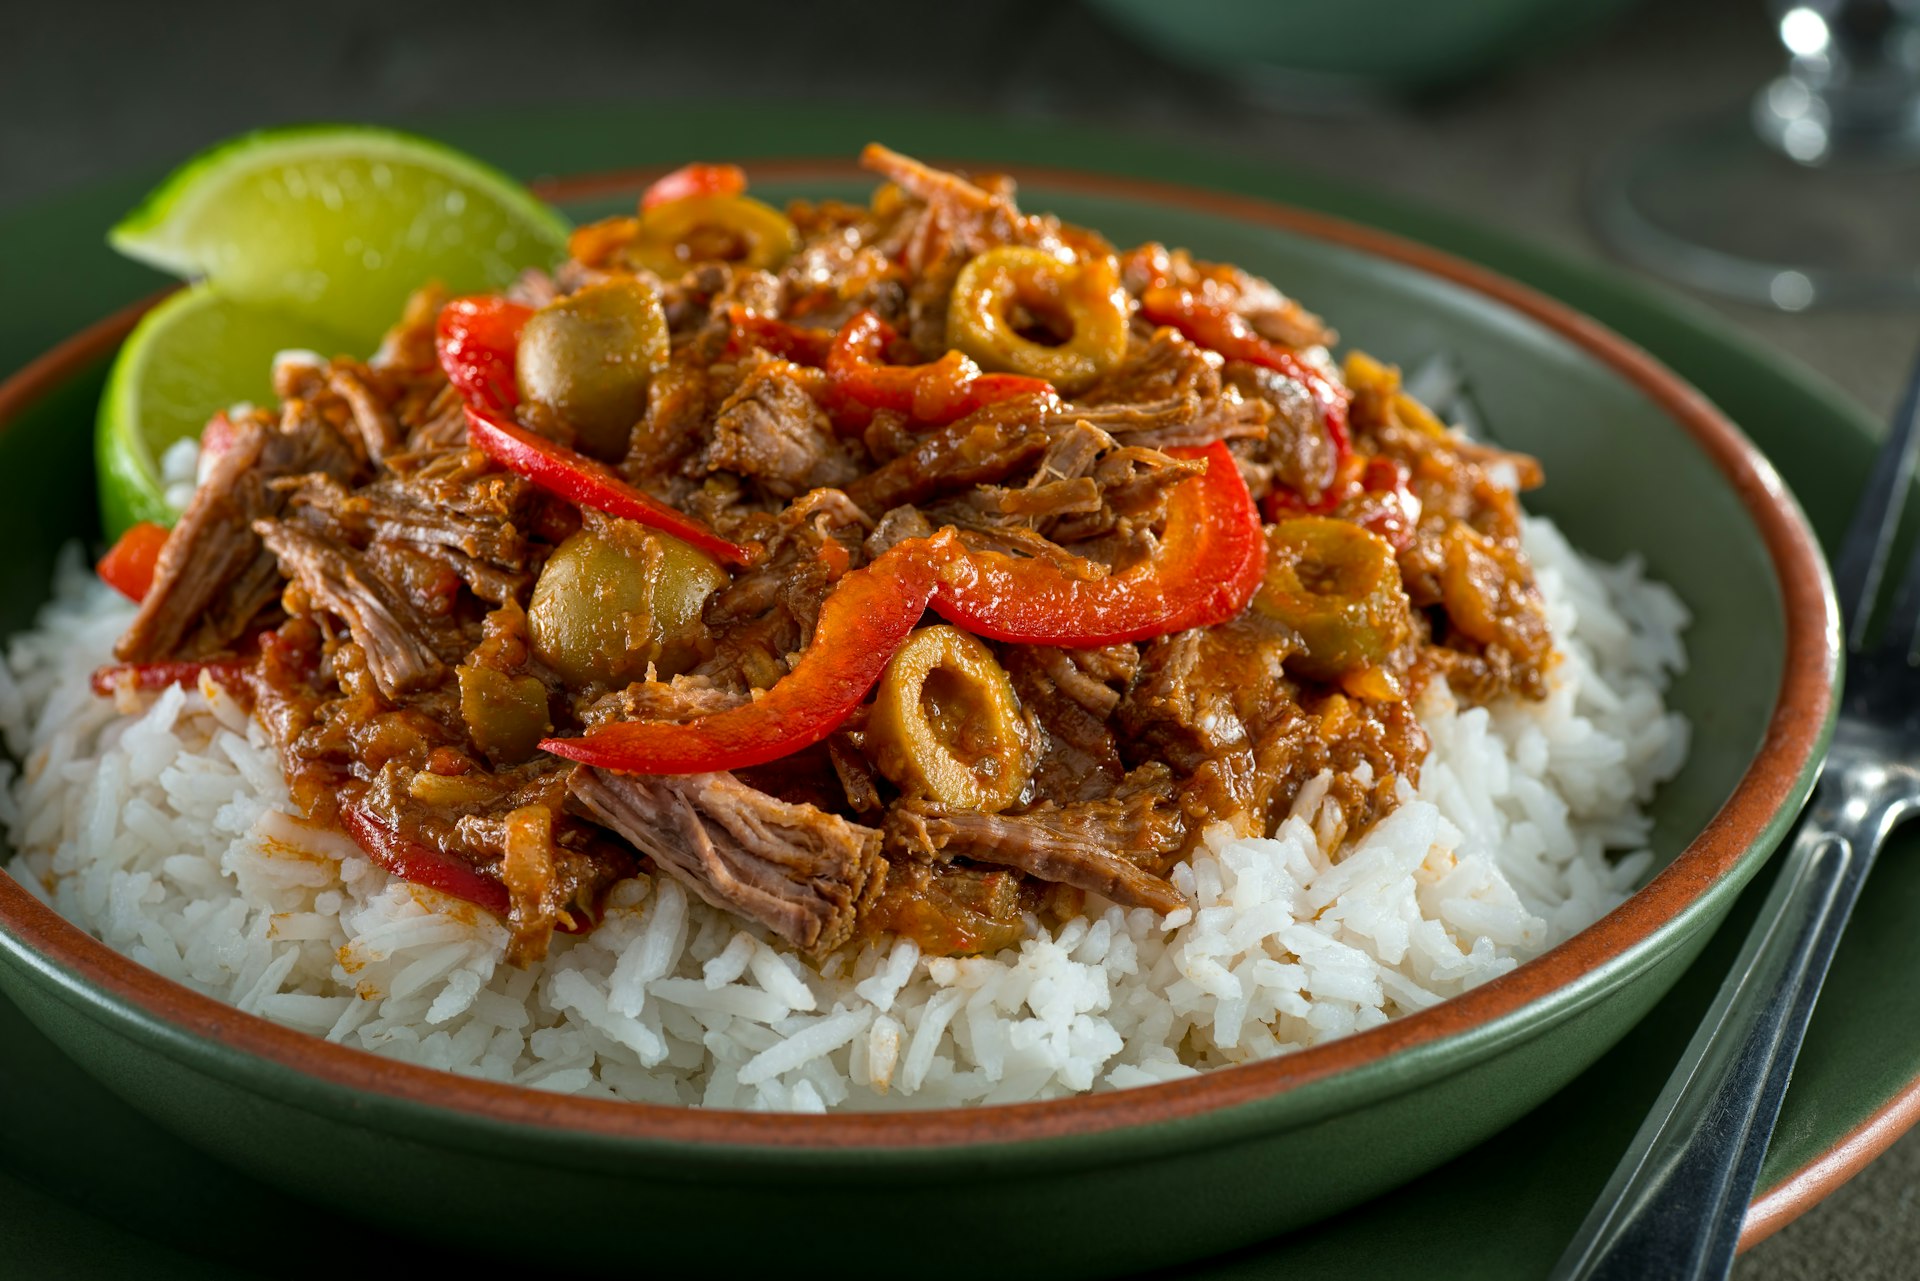 A bowl of ropa vieja, a popular Cuban dish made of stewed beef 